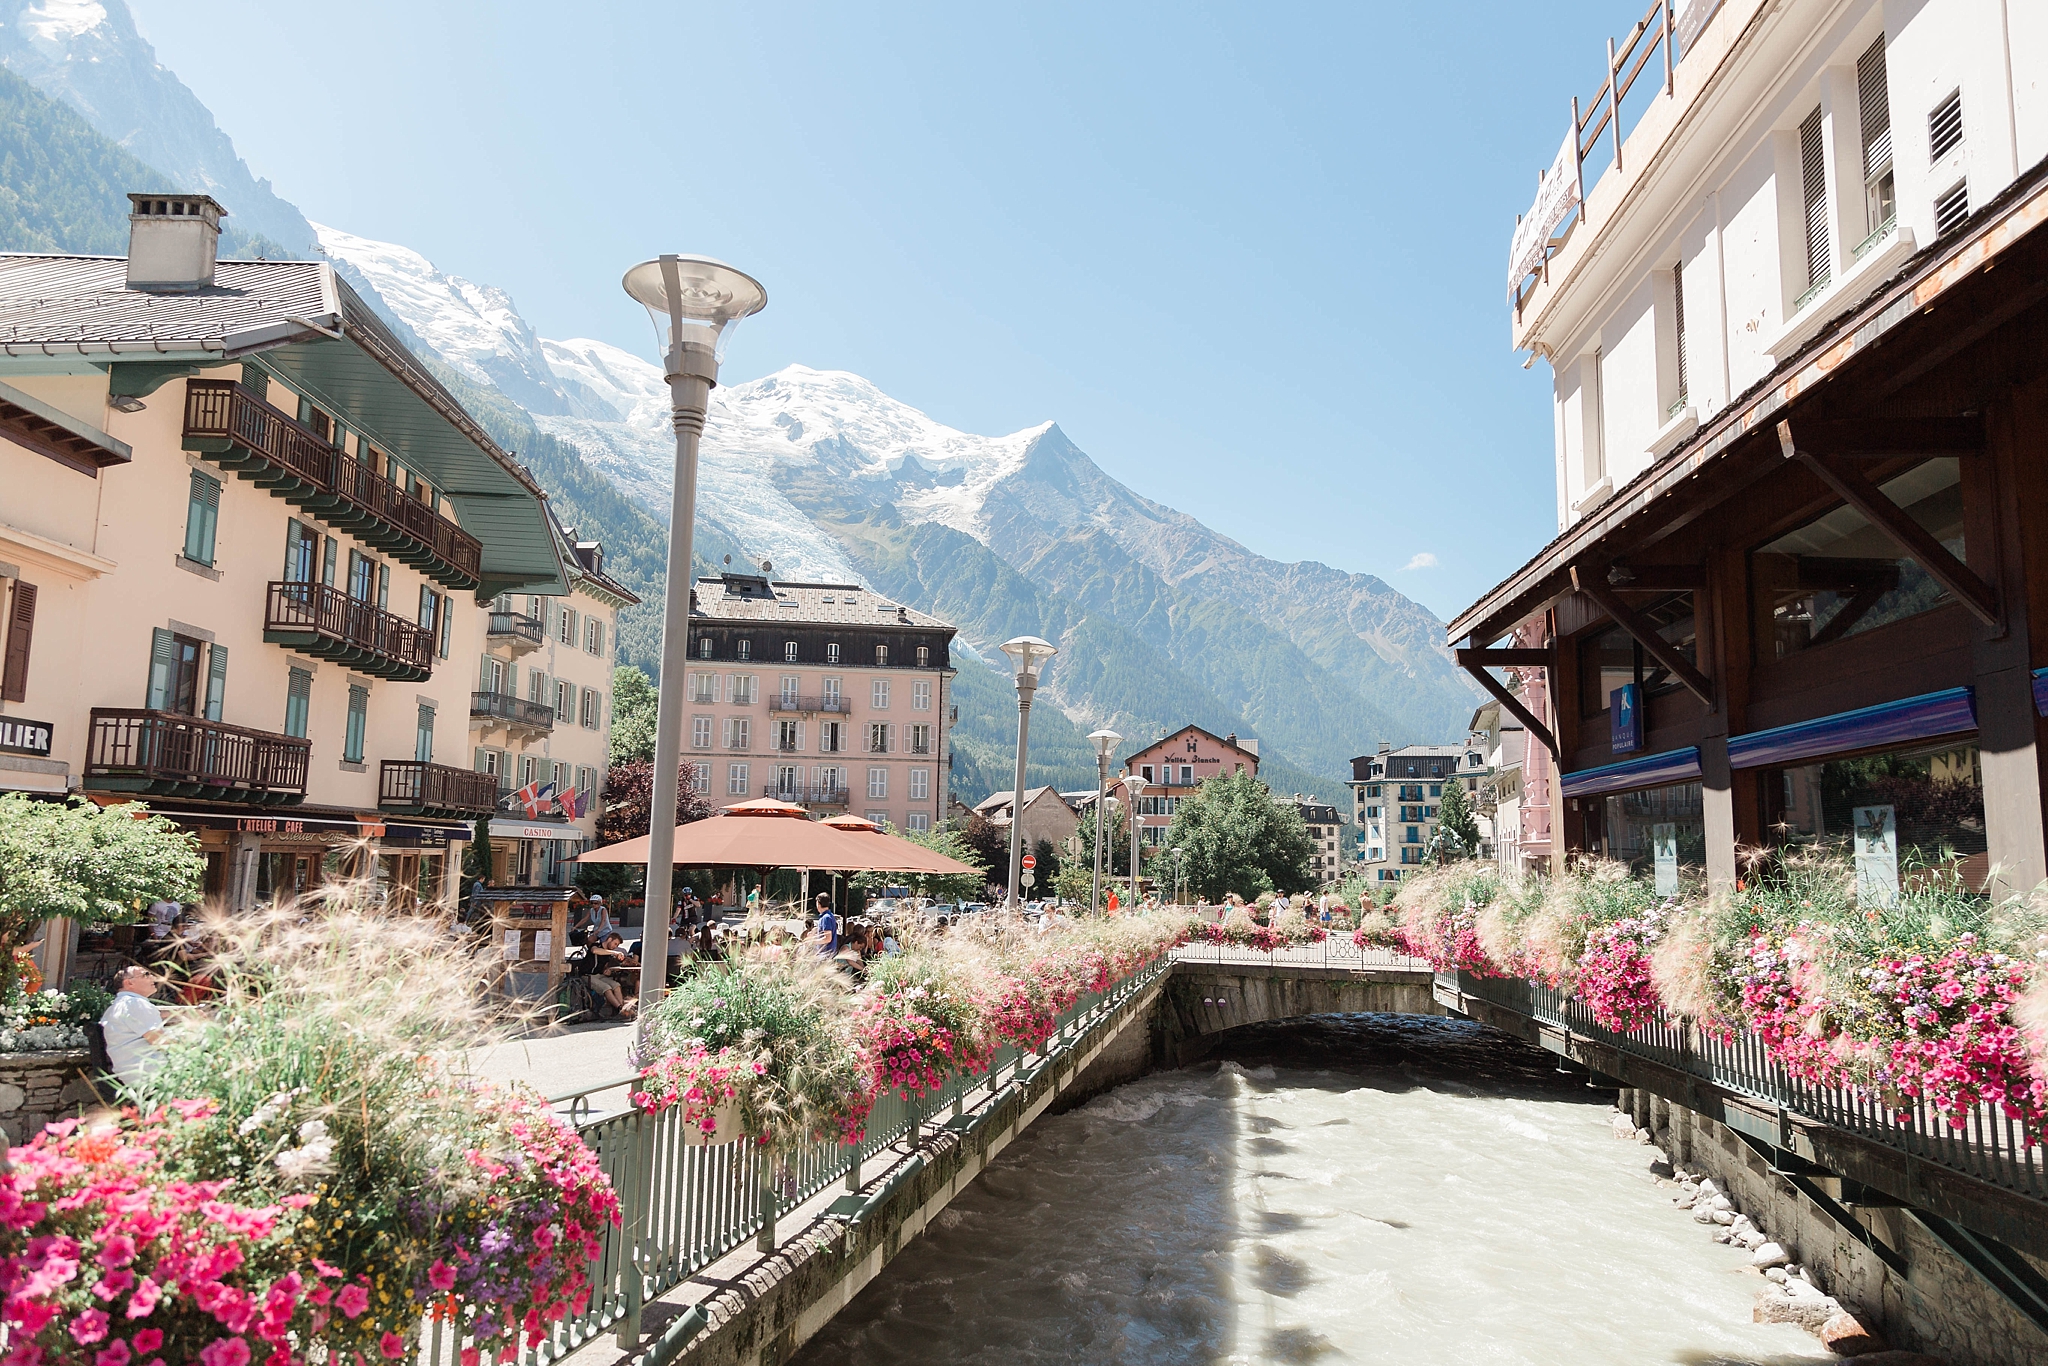 Vacation photos captured by a fine art photographer across Southern France and the Swiss Alps including stops in Gordes, Chamonix, Lauterbrunnen, and Murren. 